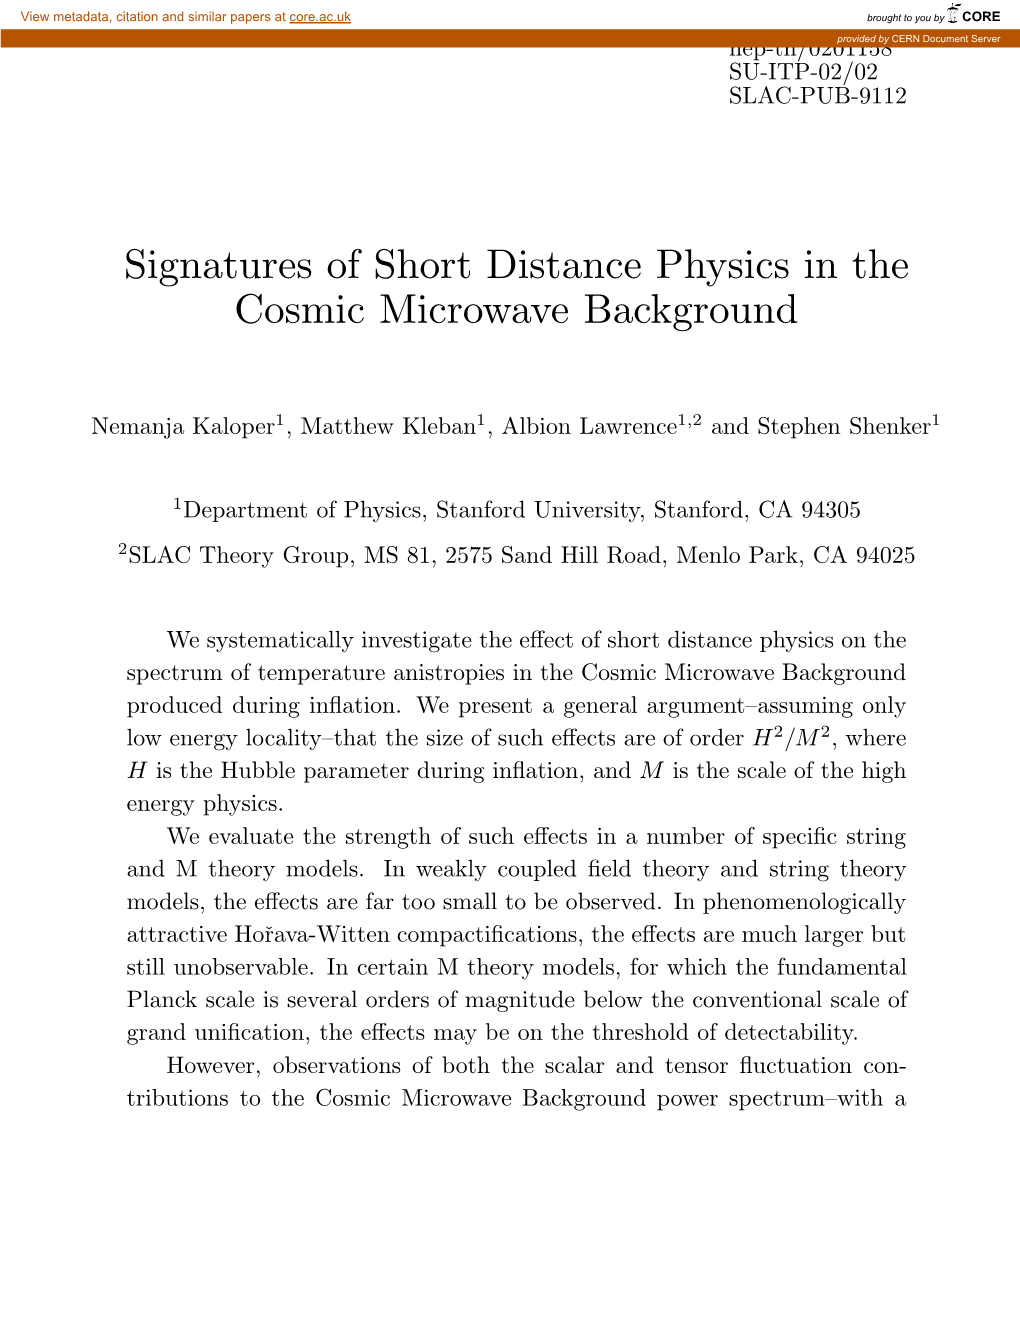 Signatures of Short Distance Physics in the Cosmic Microwave Background